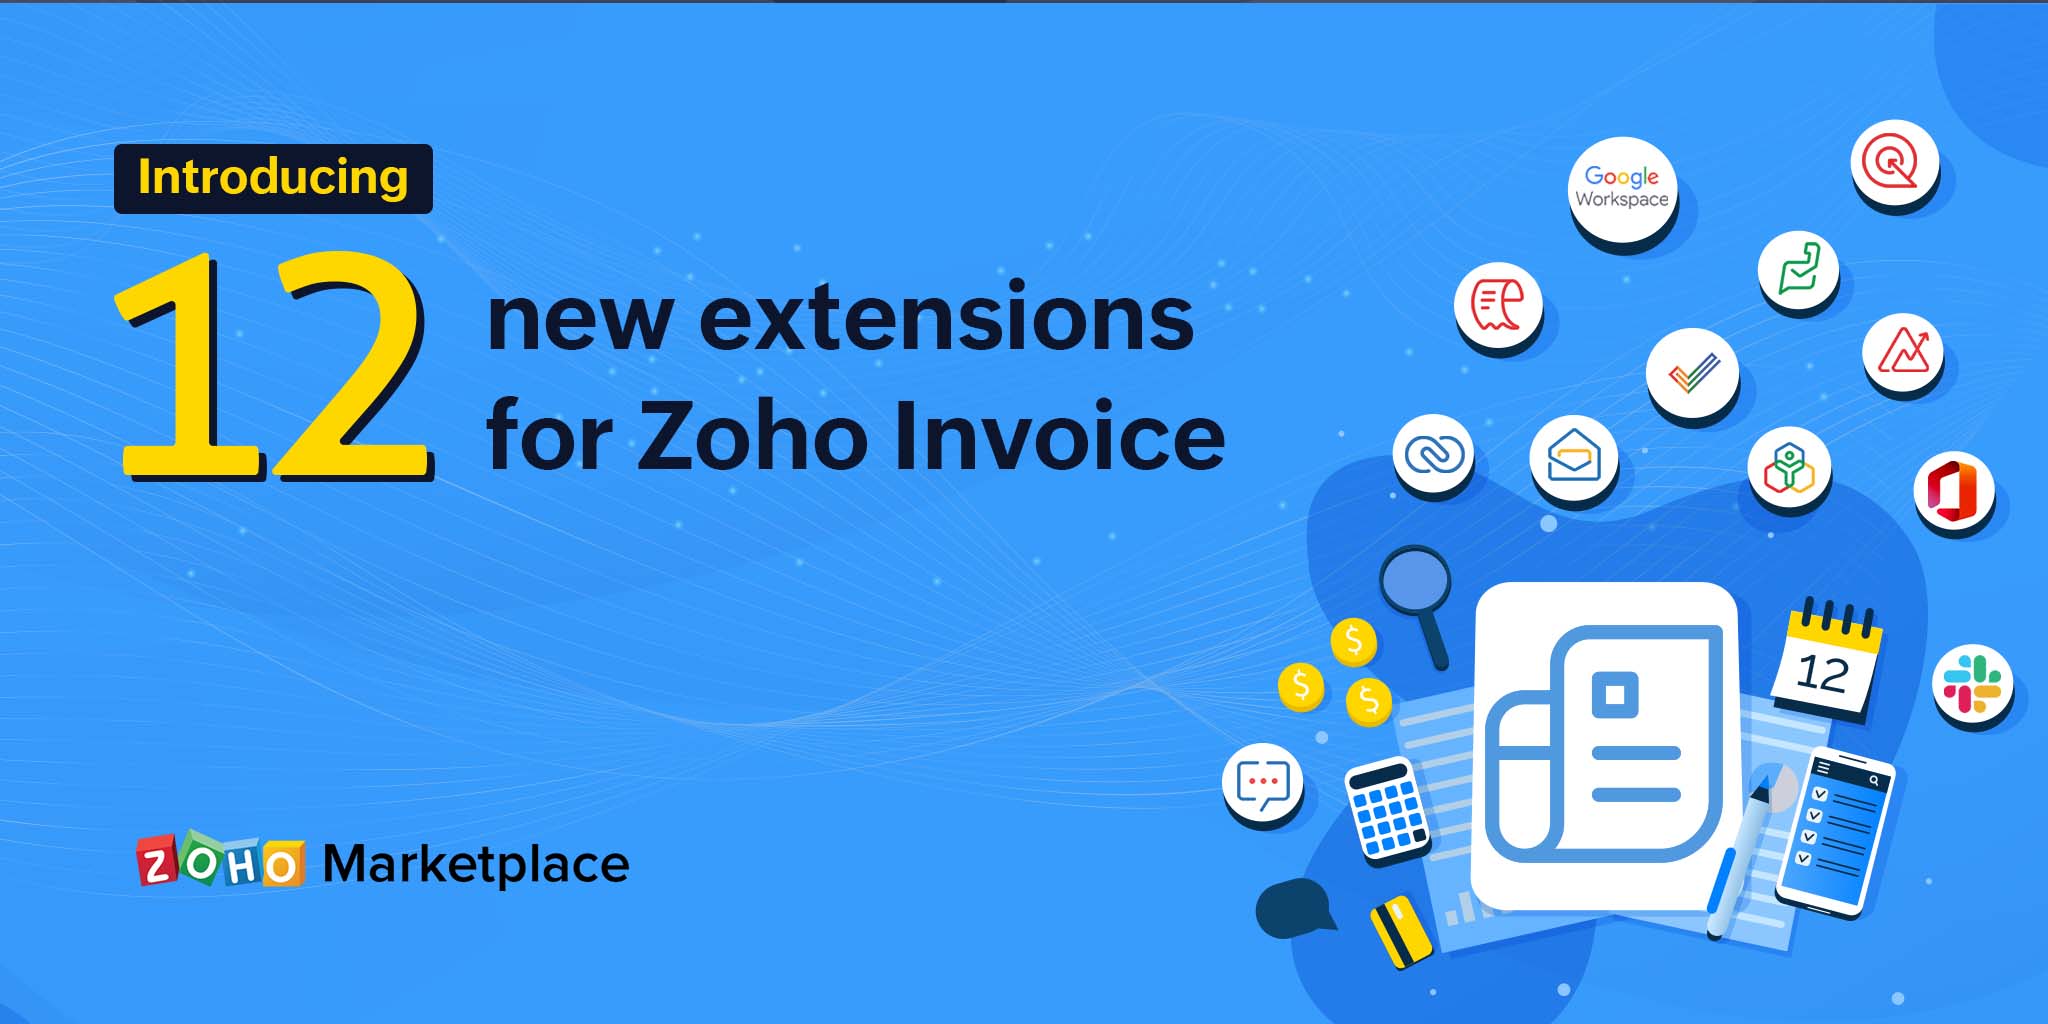 Introducing Slack, Office 365, Google Workspace, and 9 new extensions for Zoho Invoice